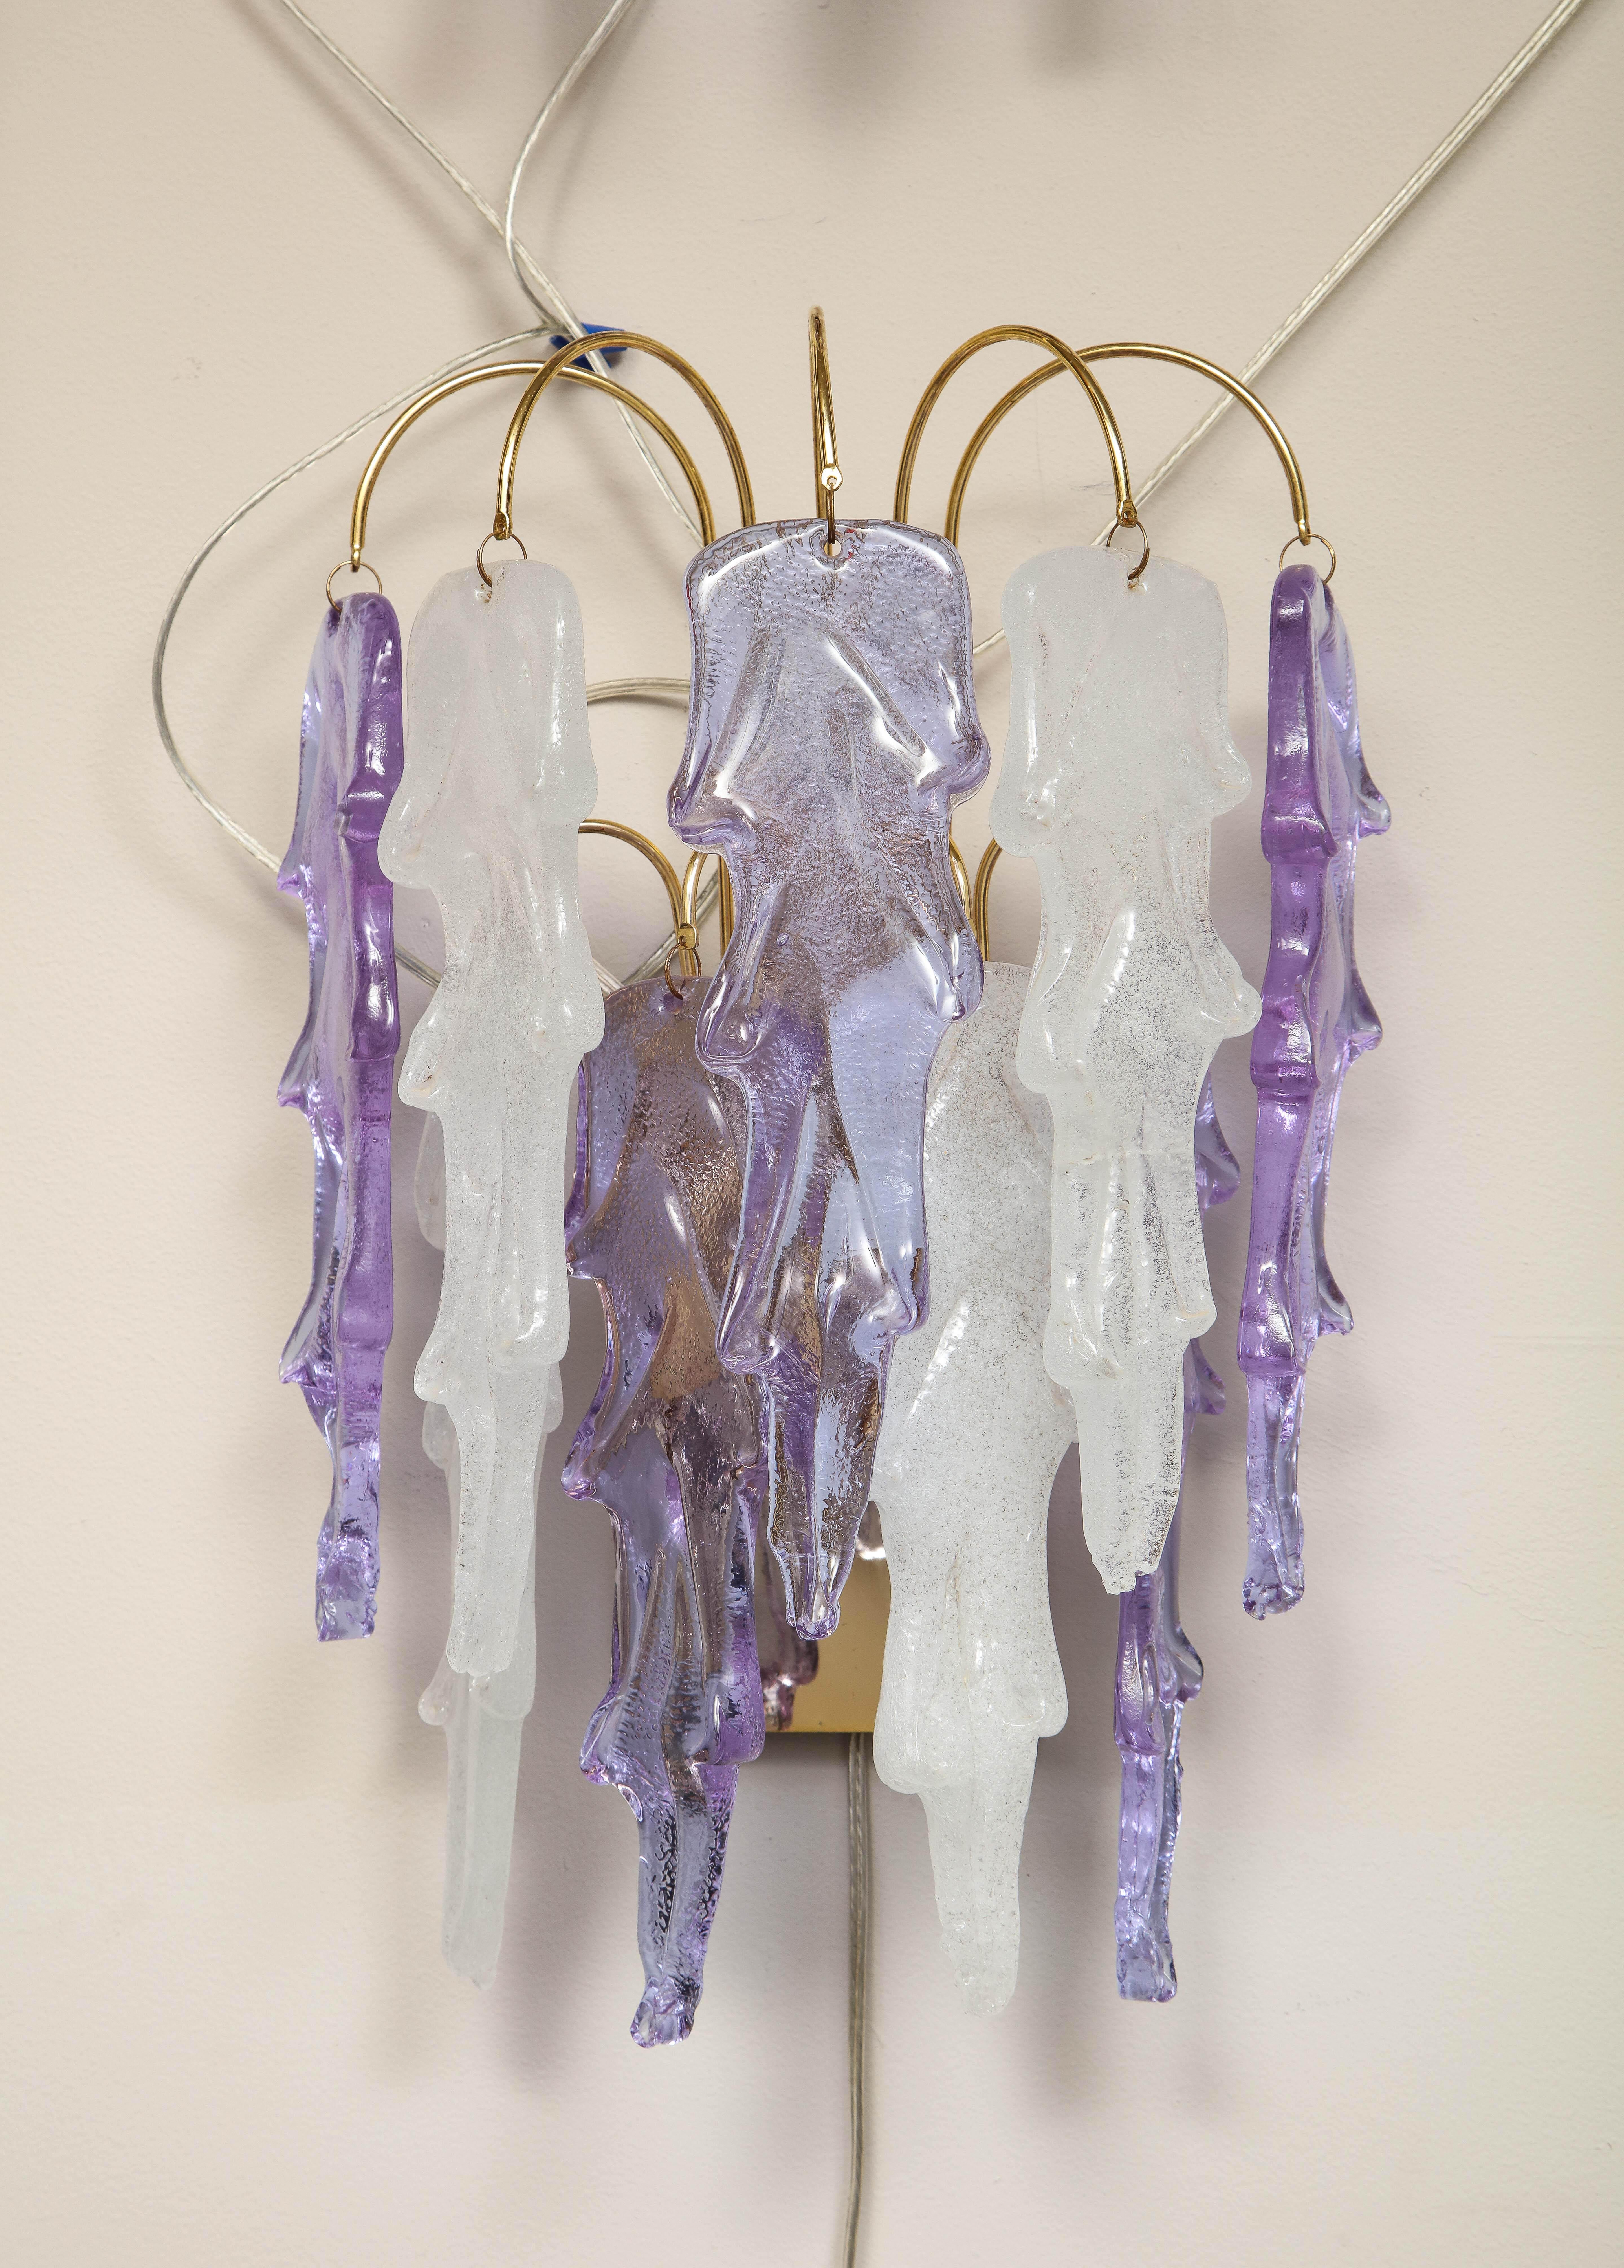 Pair of exceptional Carlo Nason Mazzega Wall Sconces with bicolor glass, Murano amethyst, and ice frost. Model unique by design and glass hung on a superb gilt gold palm structure.